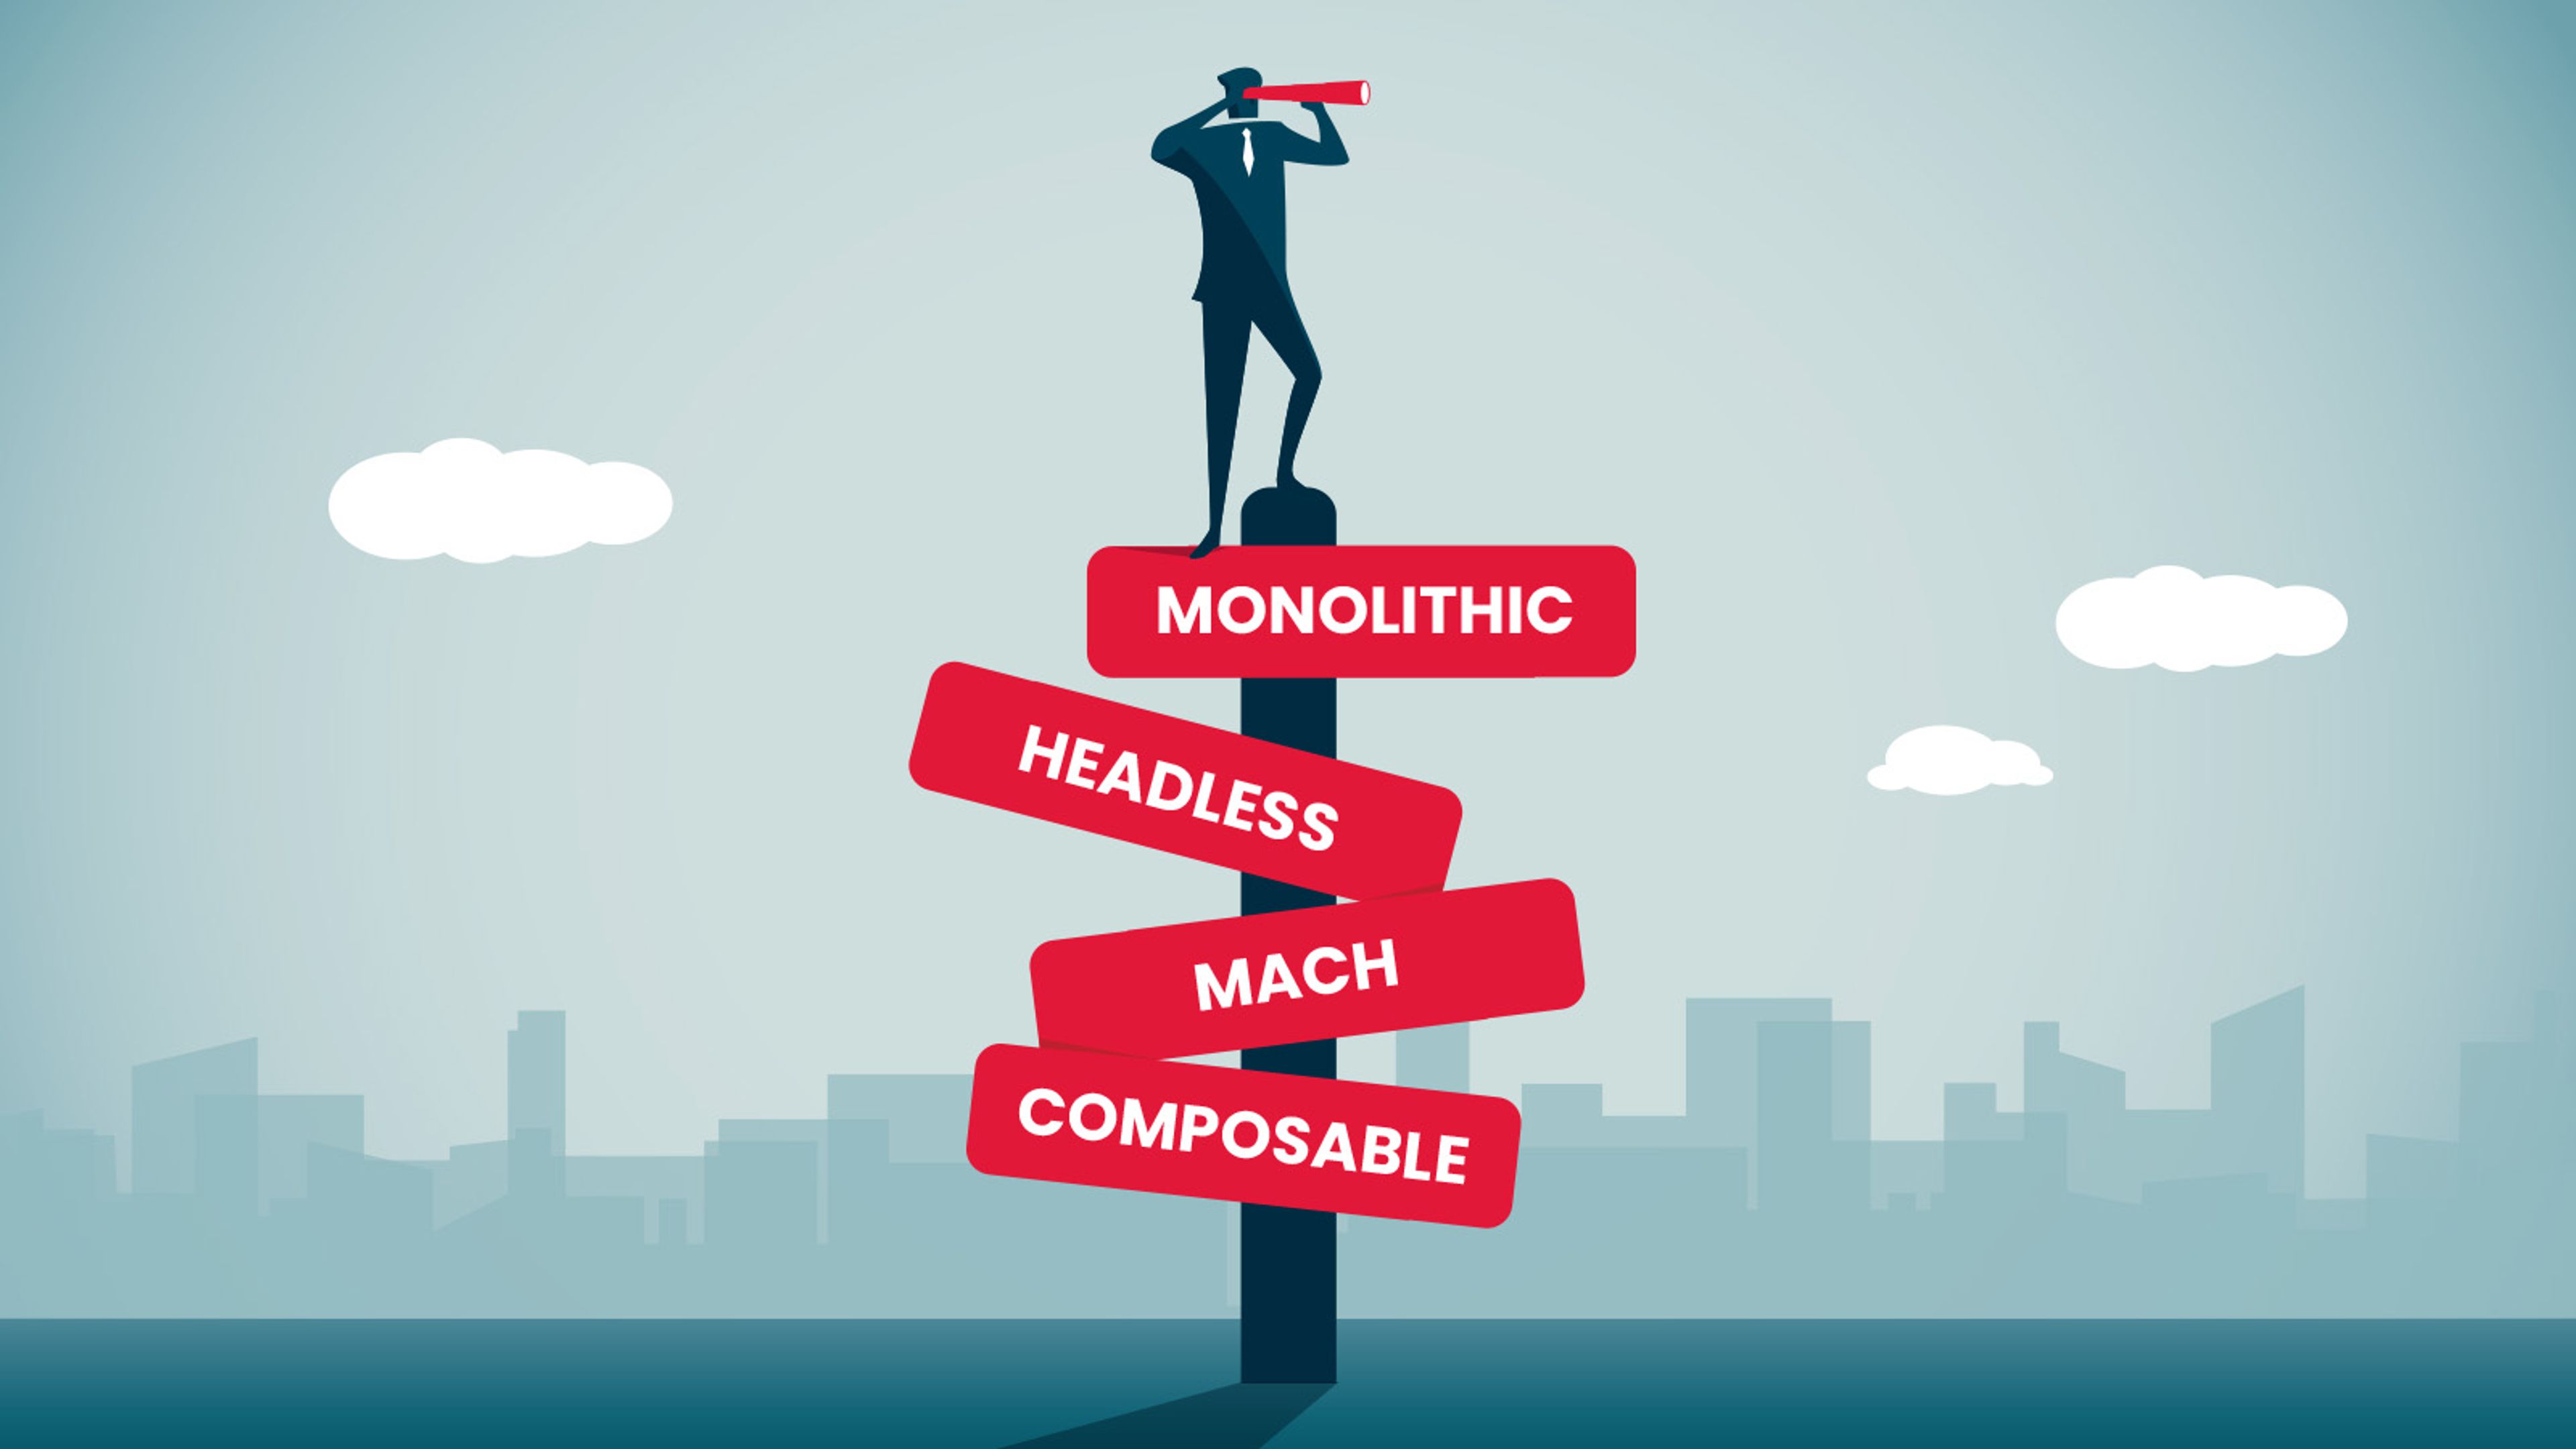 Vector illustration of a man at the top of a sign with posts reading "Monolithic," "Composable," "Headless," and "MACH." A city skyline can be seen in the distance.